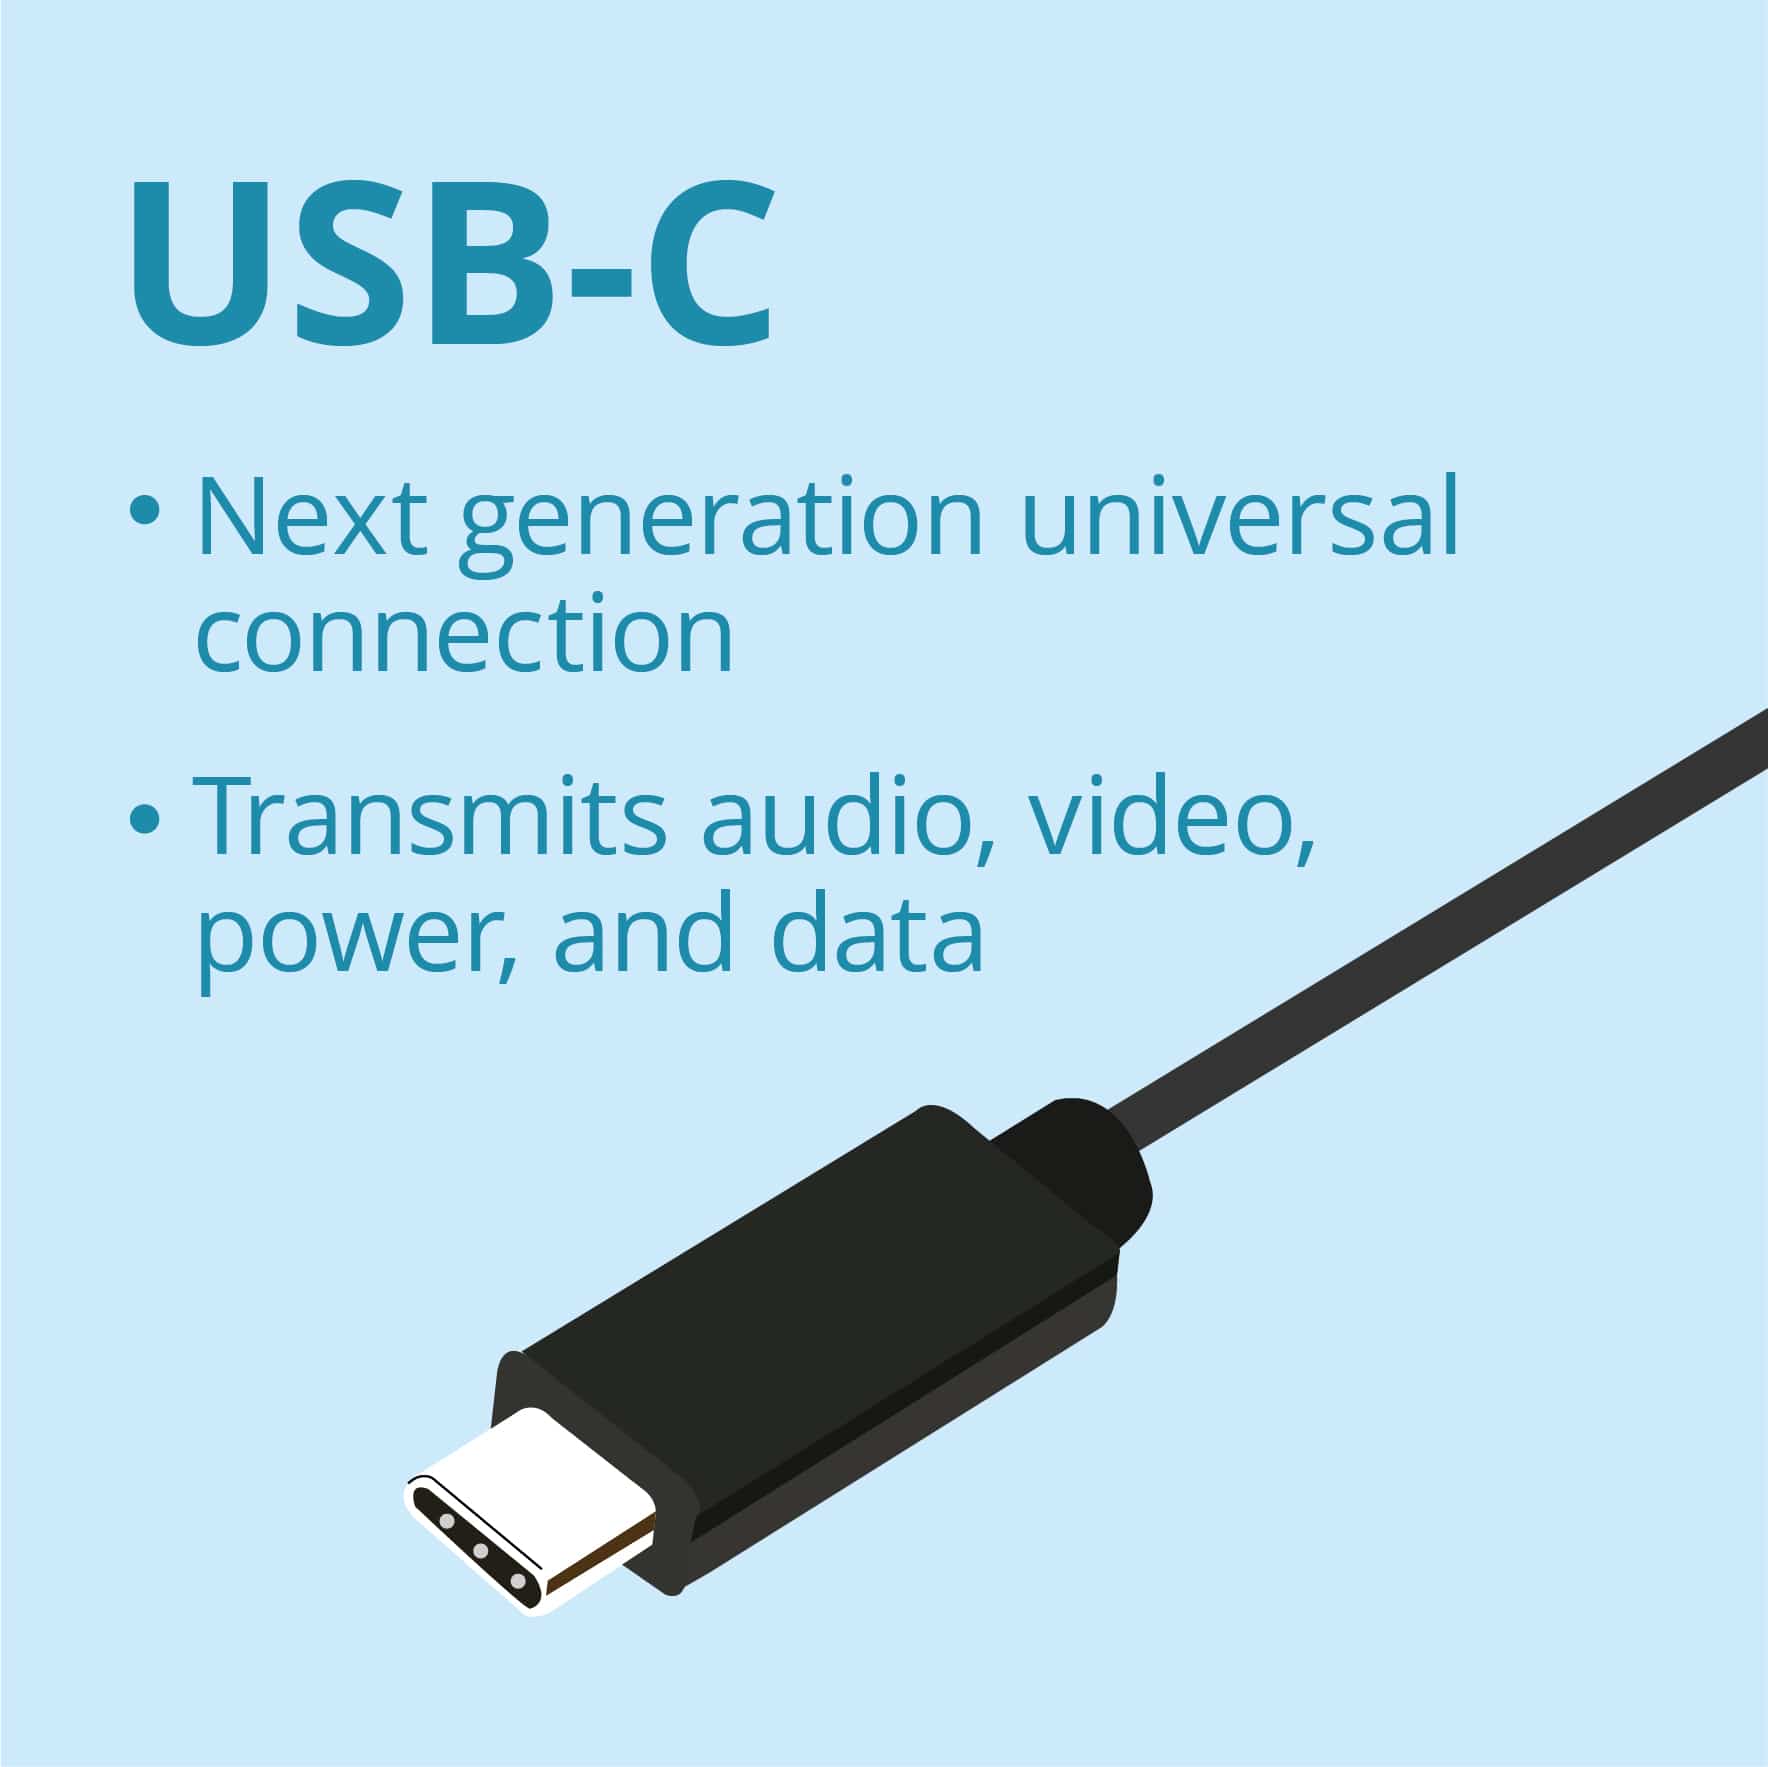 https://www.viewsonic.com/library/wp-content/uploads/2020/03/Monitor-Ports-and-USB-C-A-Comparison-of-Display-Connections-USB-C.jpg